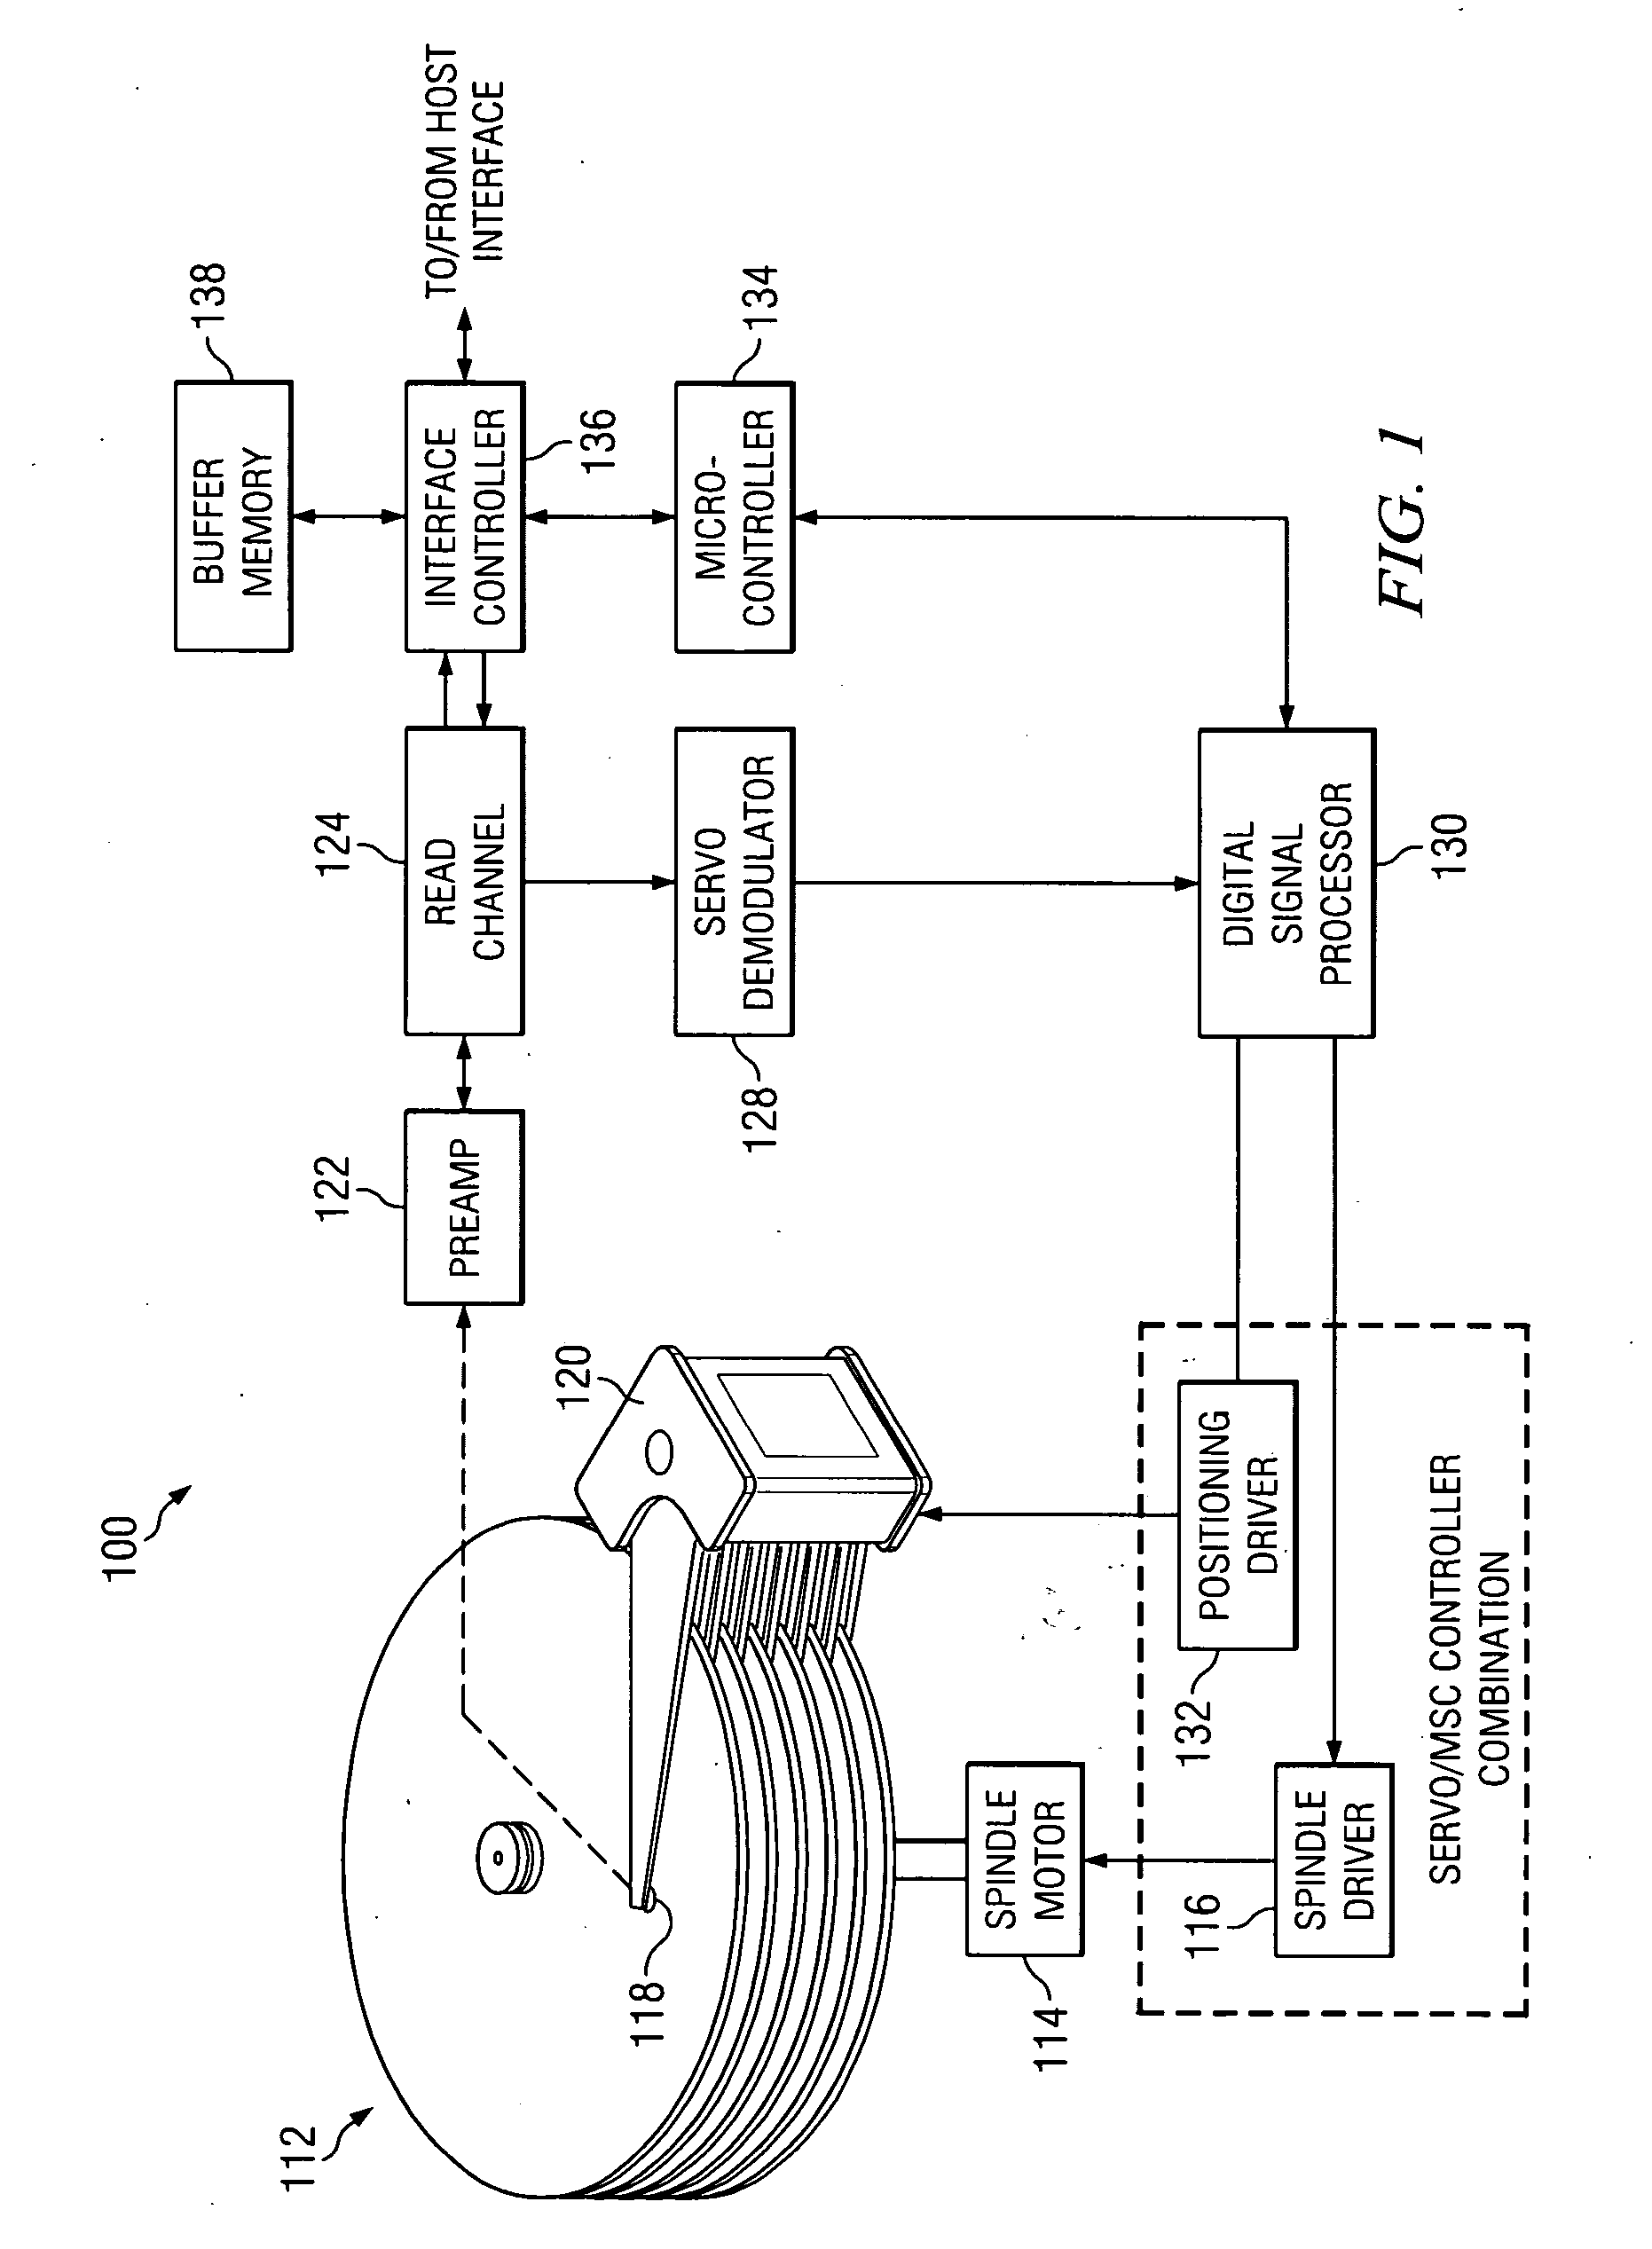 Temperature compensation systems and methods for use with read/write heads in magnetic storage devices